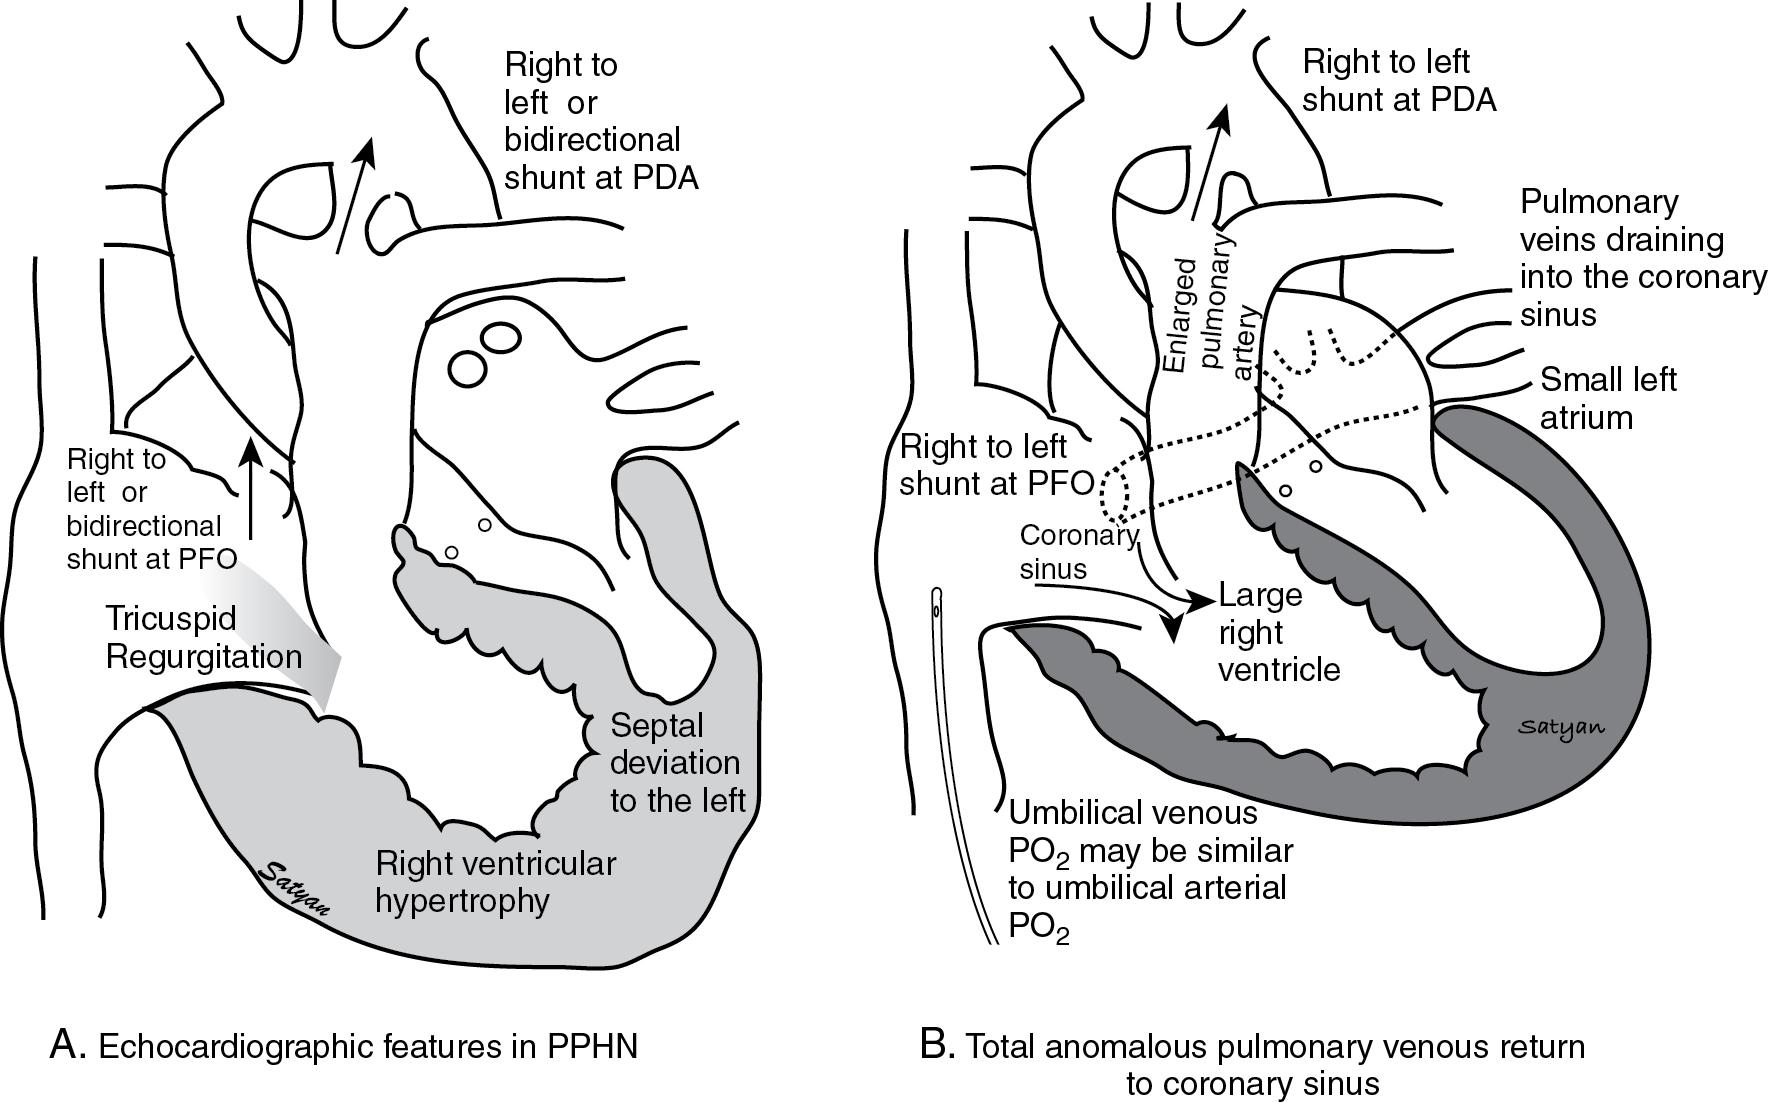 Fig. 17.11, (A) Echocardiographic features of PPHN. Infants with significant PPHN often have a right-to-left or bidirectional shunt at the level of the patent foramen ovale (PFO) and/or patent ductus arteriosus (PDA). Tricuspid regurgitation (TR) jet is often noted and is used to estimated right ventricular systolic pressure. Right ventricular hypertrophy with deviation of interventricular septum to the left is commonly present. (B) Cardiac findings in total anomalous pulmonary venous return (TAPVR) to the coronary sinus. Left atrium is small and pulmonary venous flow is diverted to the right atrium. The left atrium is filled by a right-to-left shunt across the PFO. The right ventricle and pulmonary artery are enlarged because of increased blood flow. Pulmonary arterial blood flows right to left across the PDA to the aorta. If the tip of the umbilical venous catheter is in the right atrium, P o 2 levels might be relatively high—similar to umbilical arterial sample—as oxygenated blood enters the right atrium.